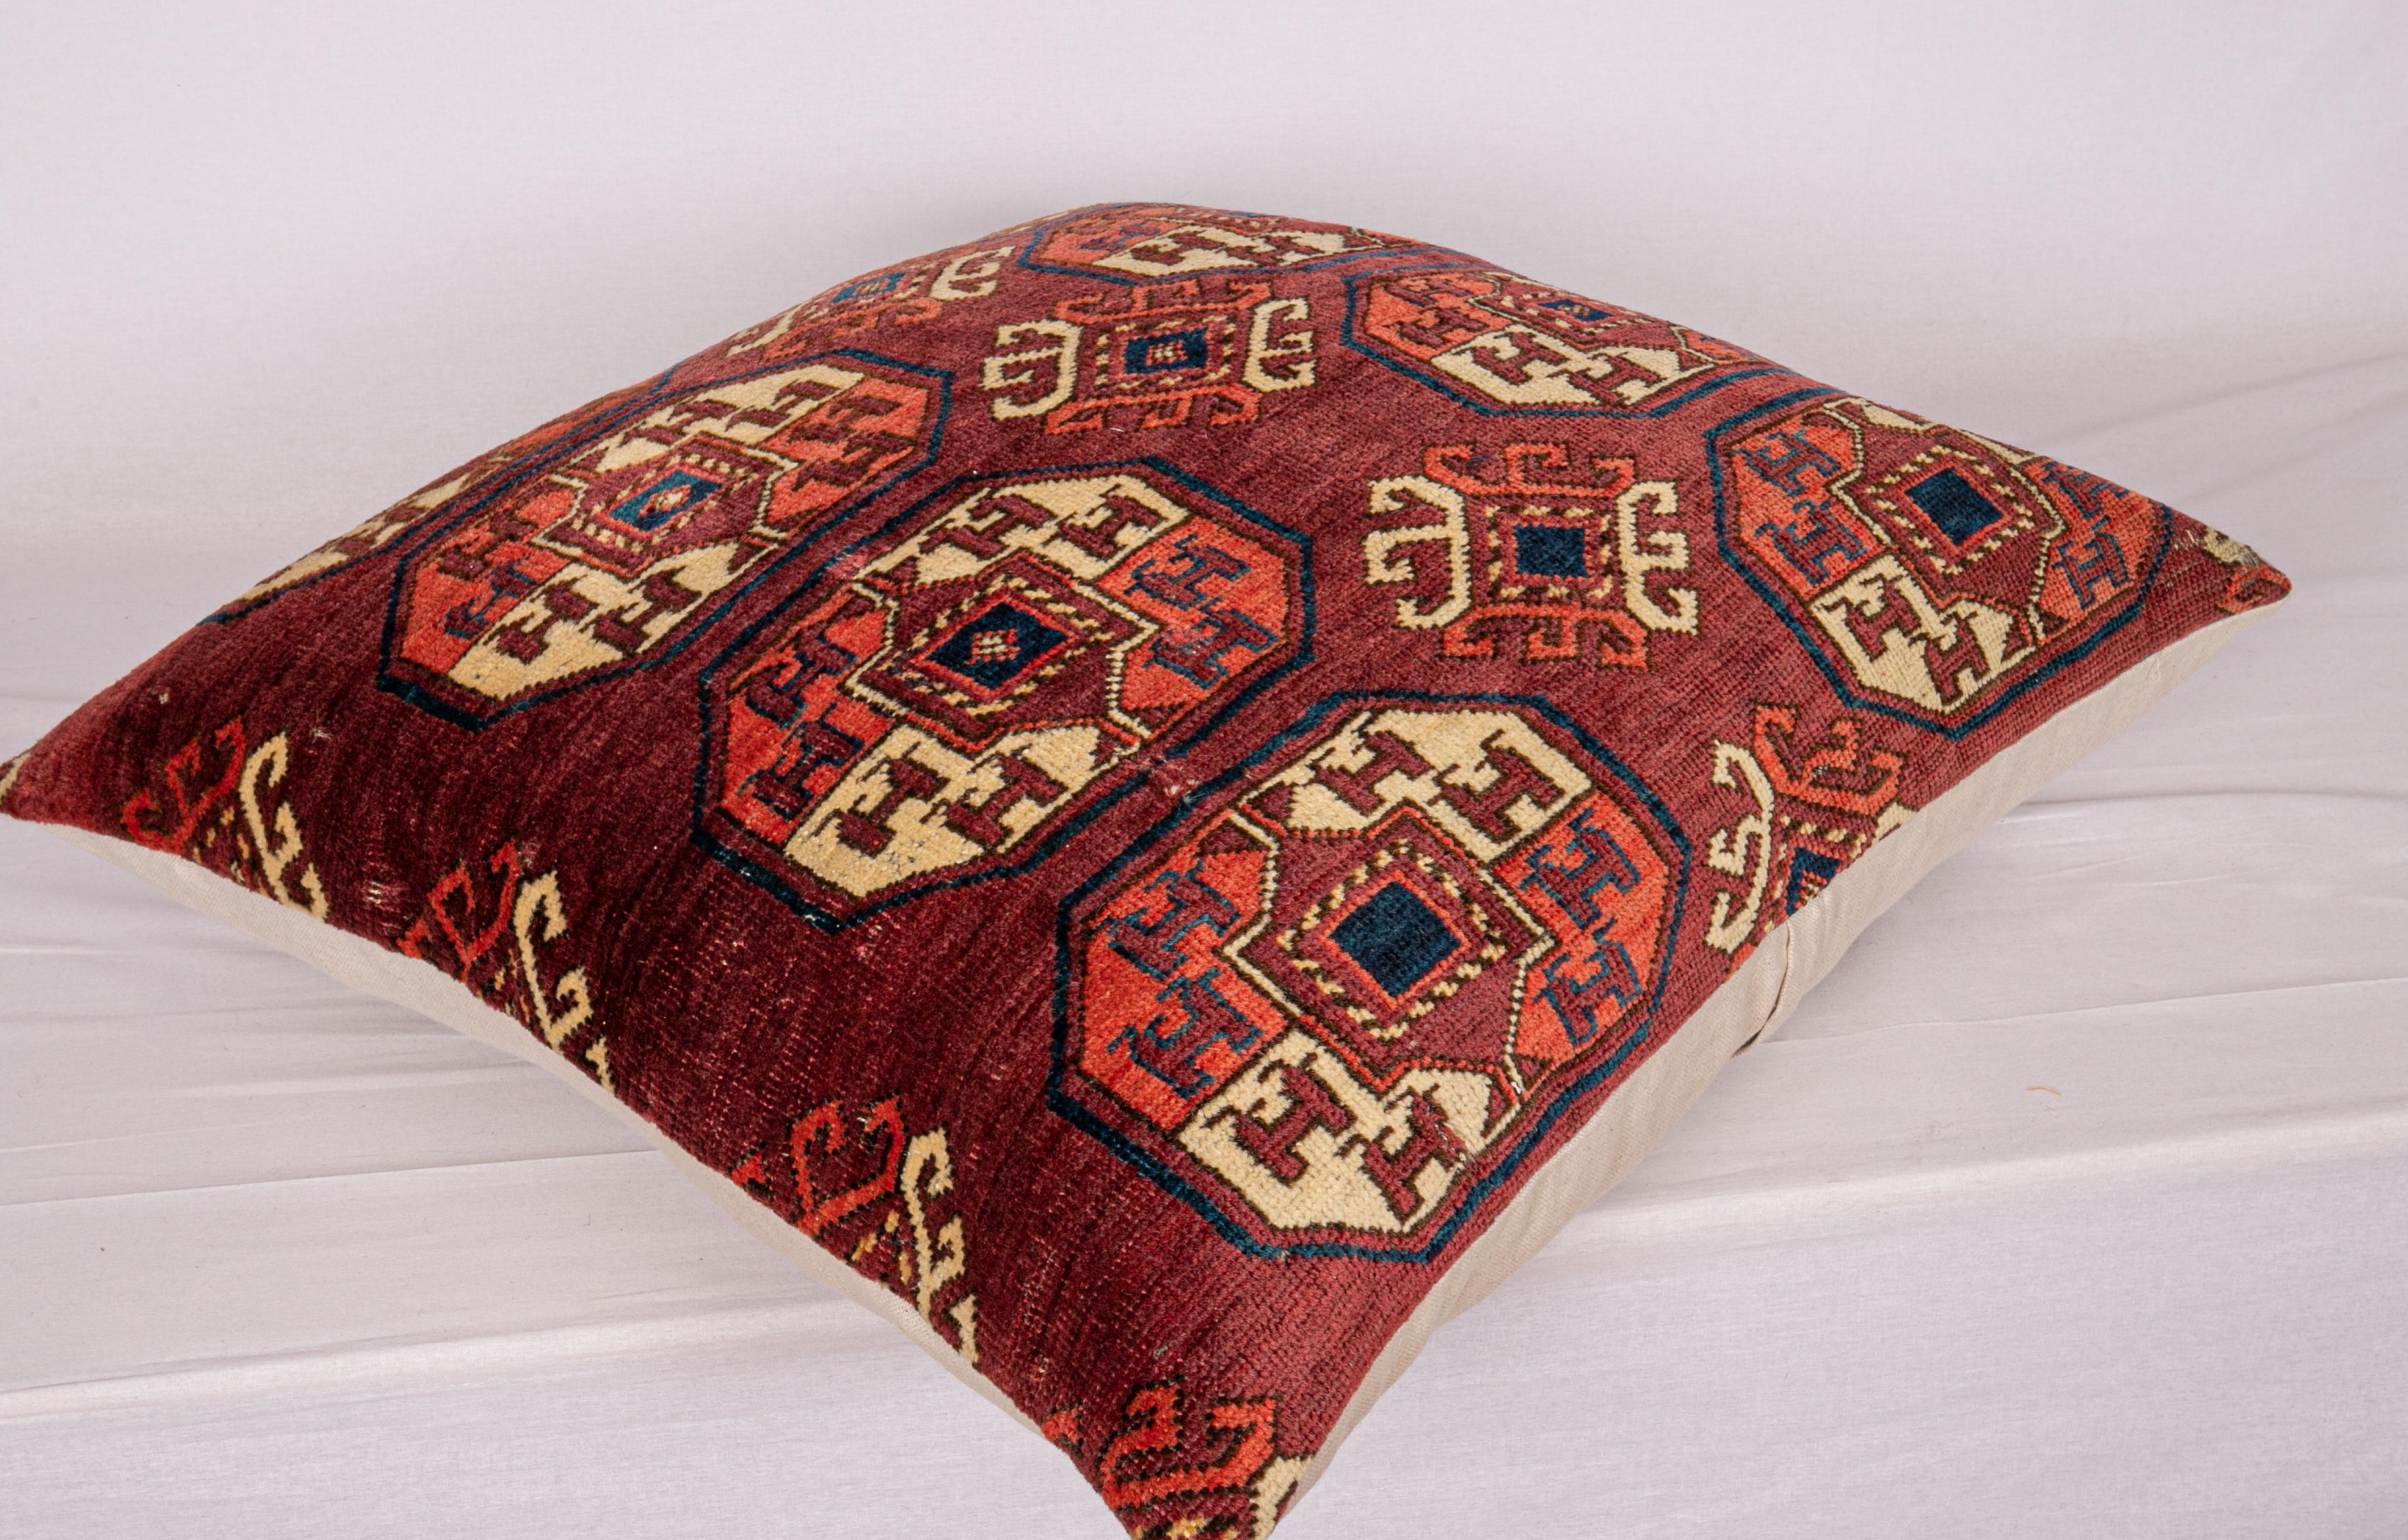 Hand-Woven Antique Turkmen Large Rug Pillow Case Made from a 19th Century Turkmen Main Rug